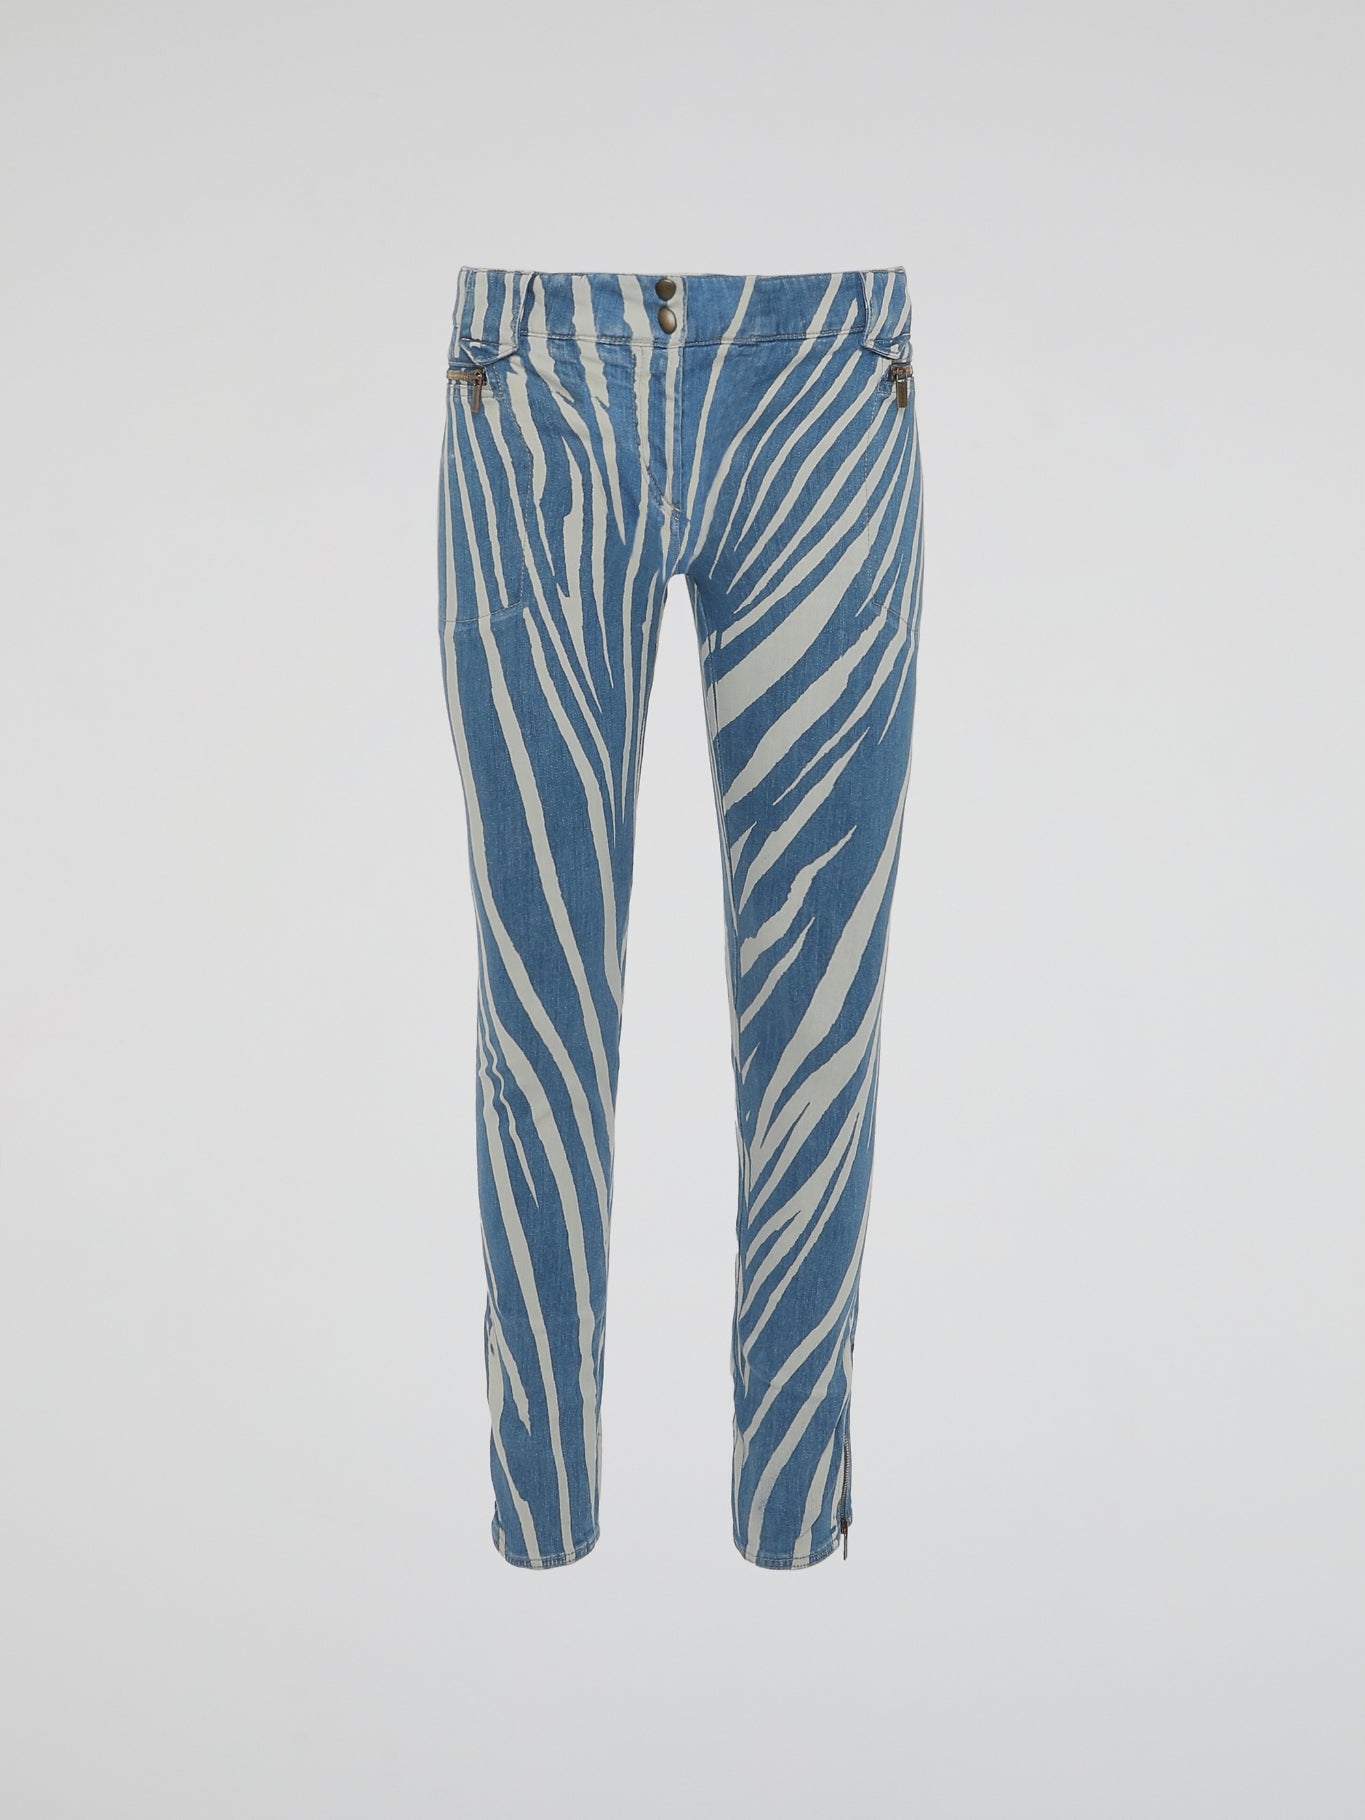 Unleash your inner wild child with our Roberto Cavalli Zebra Print Skinny Jeans. Made from high-quality denim, these jeans embrace the perfect combination of fierce and fashionable. Stand out from the crowd and embrace your unique style with these eye-catching and adventurous bottoms.